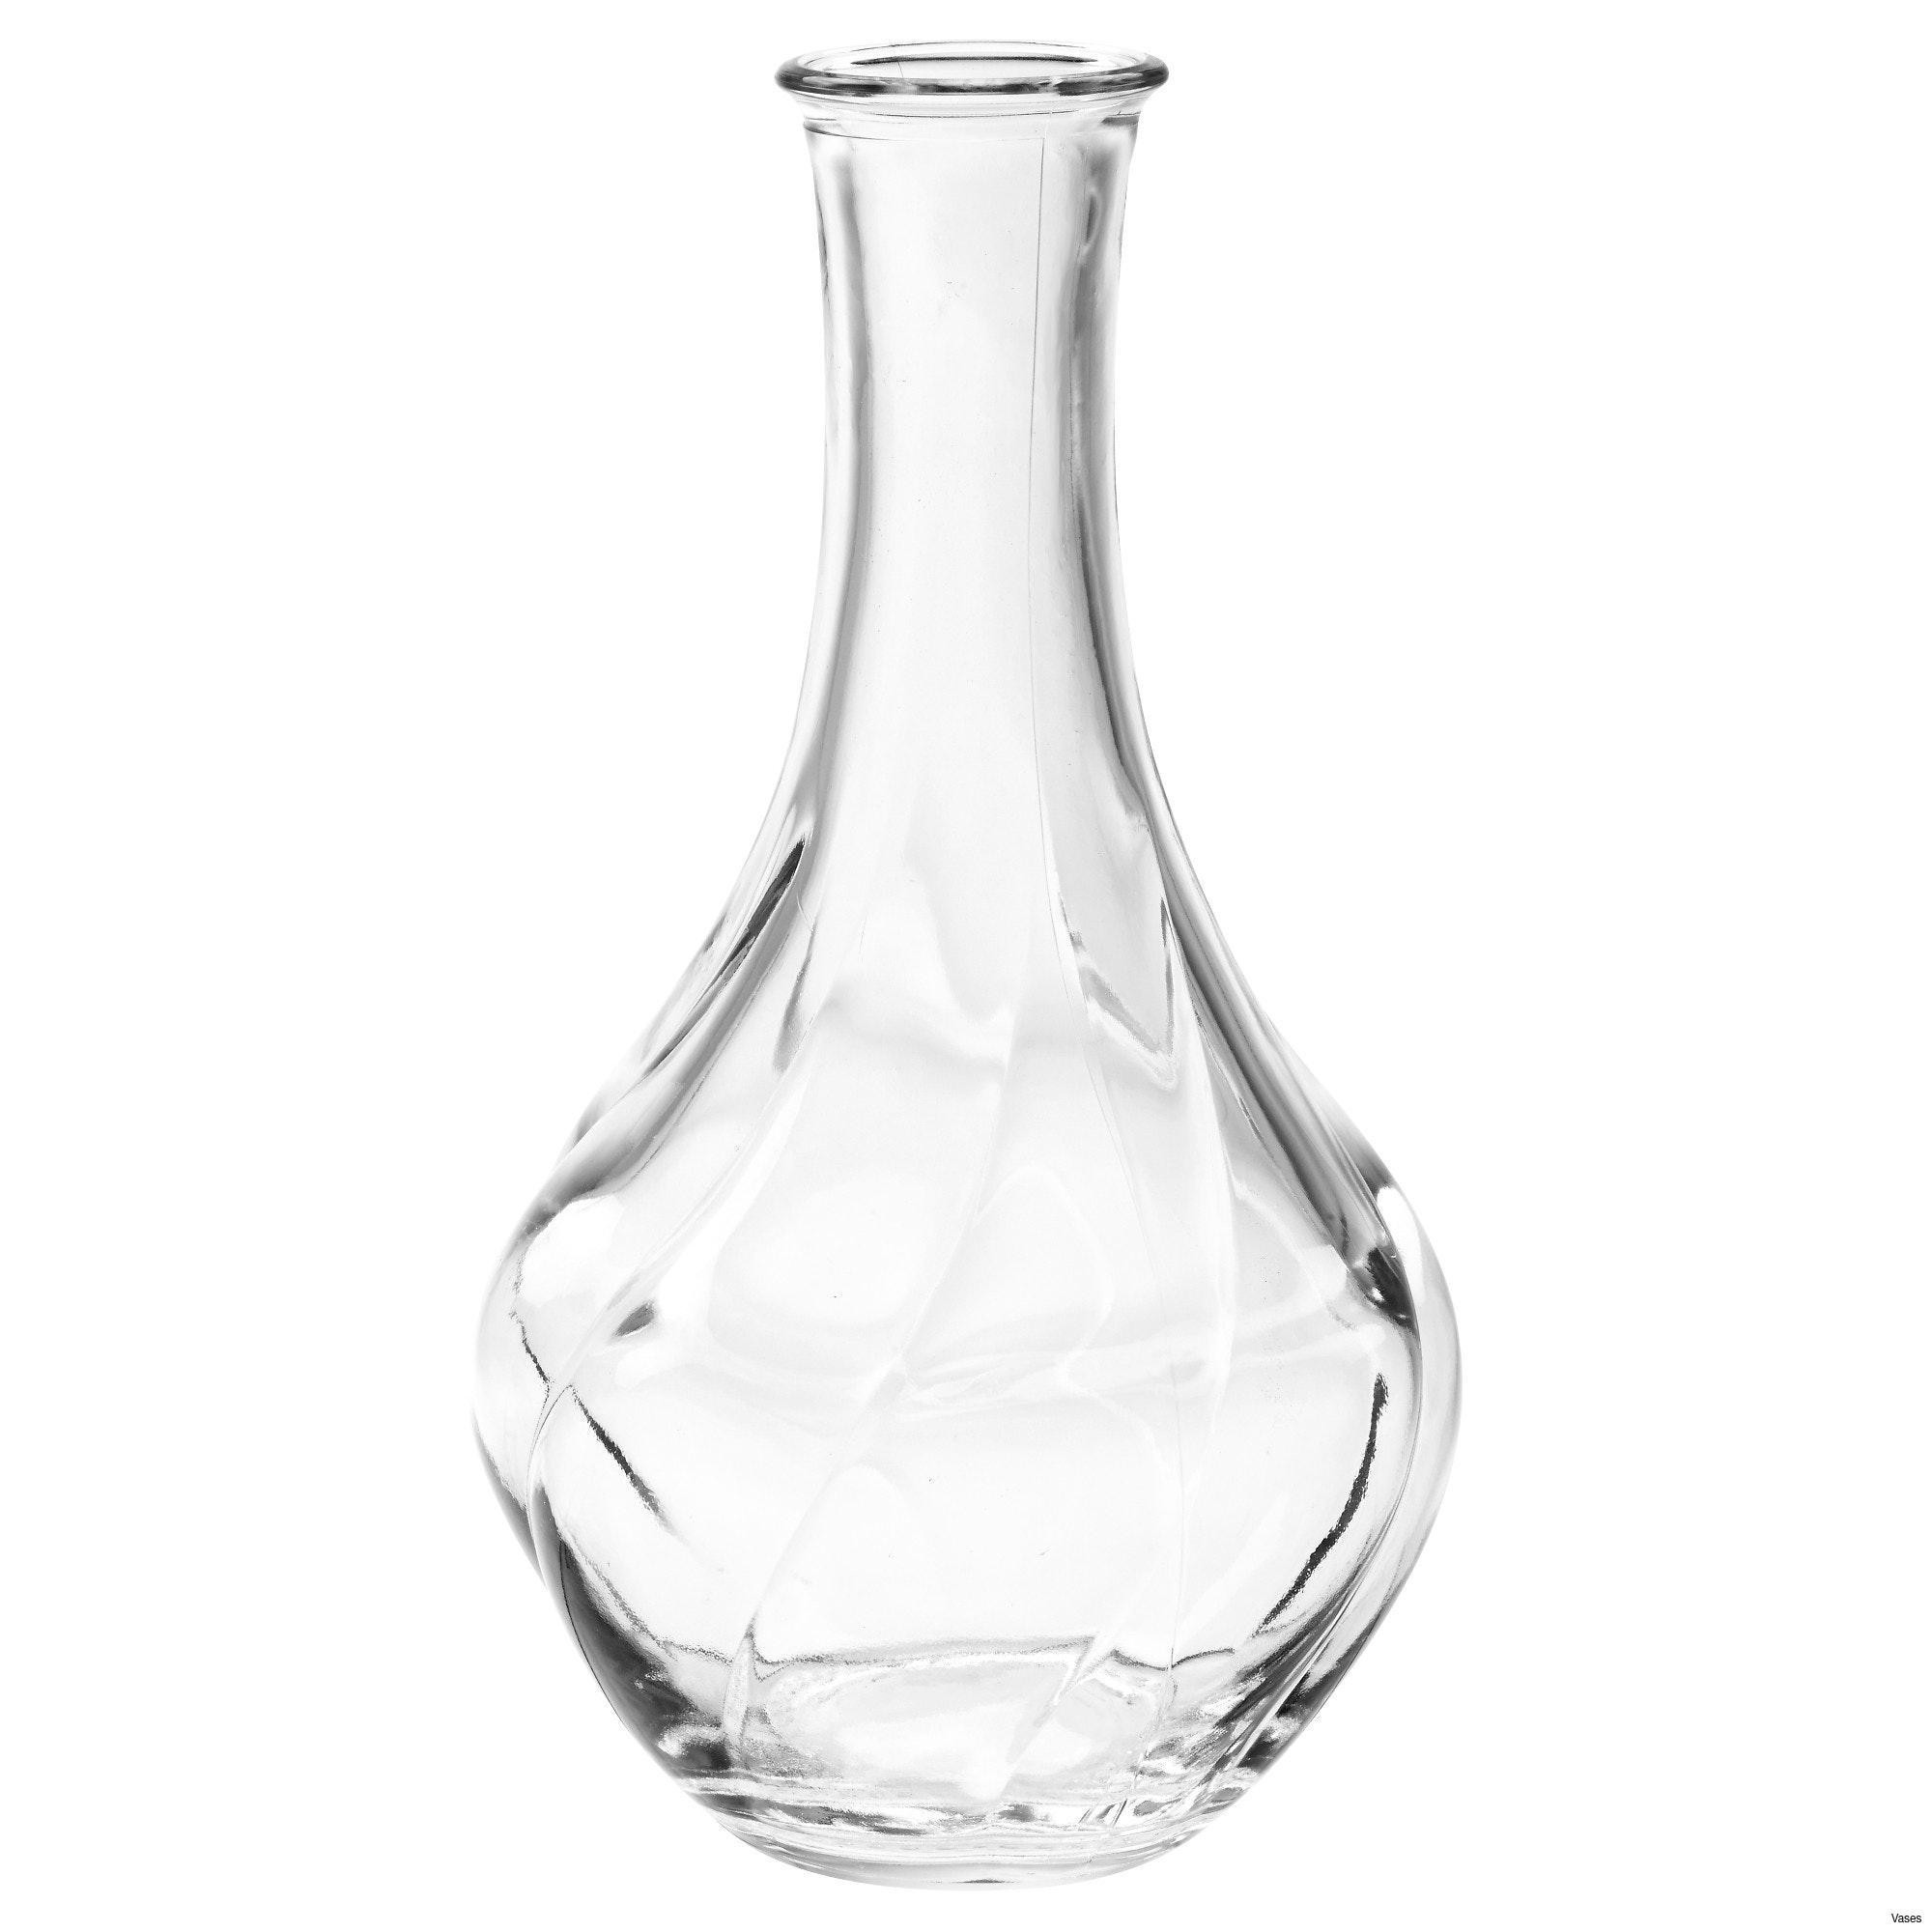 28 Spectacular Lead Crystal Cut Glass Vase 2024 free download lead crystal cut glass vase of large crystal vase pictures living room glass vases fresh clear vase in large crystal vase pictures living room glass vases fresh clear vase 0d tags amazing an